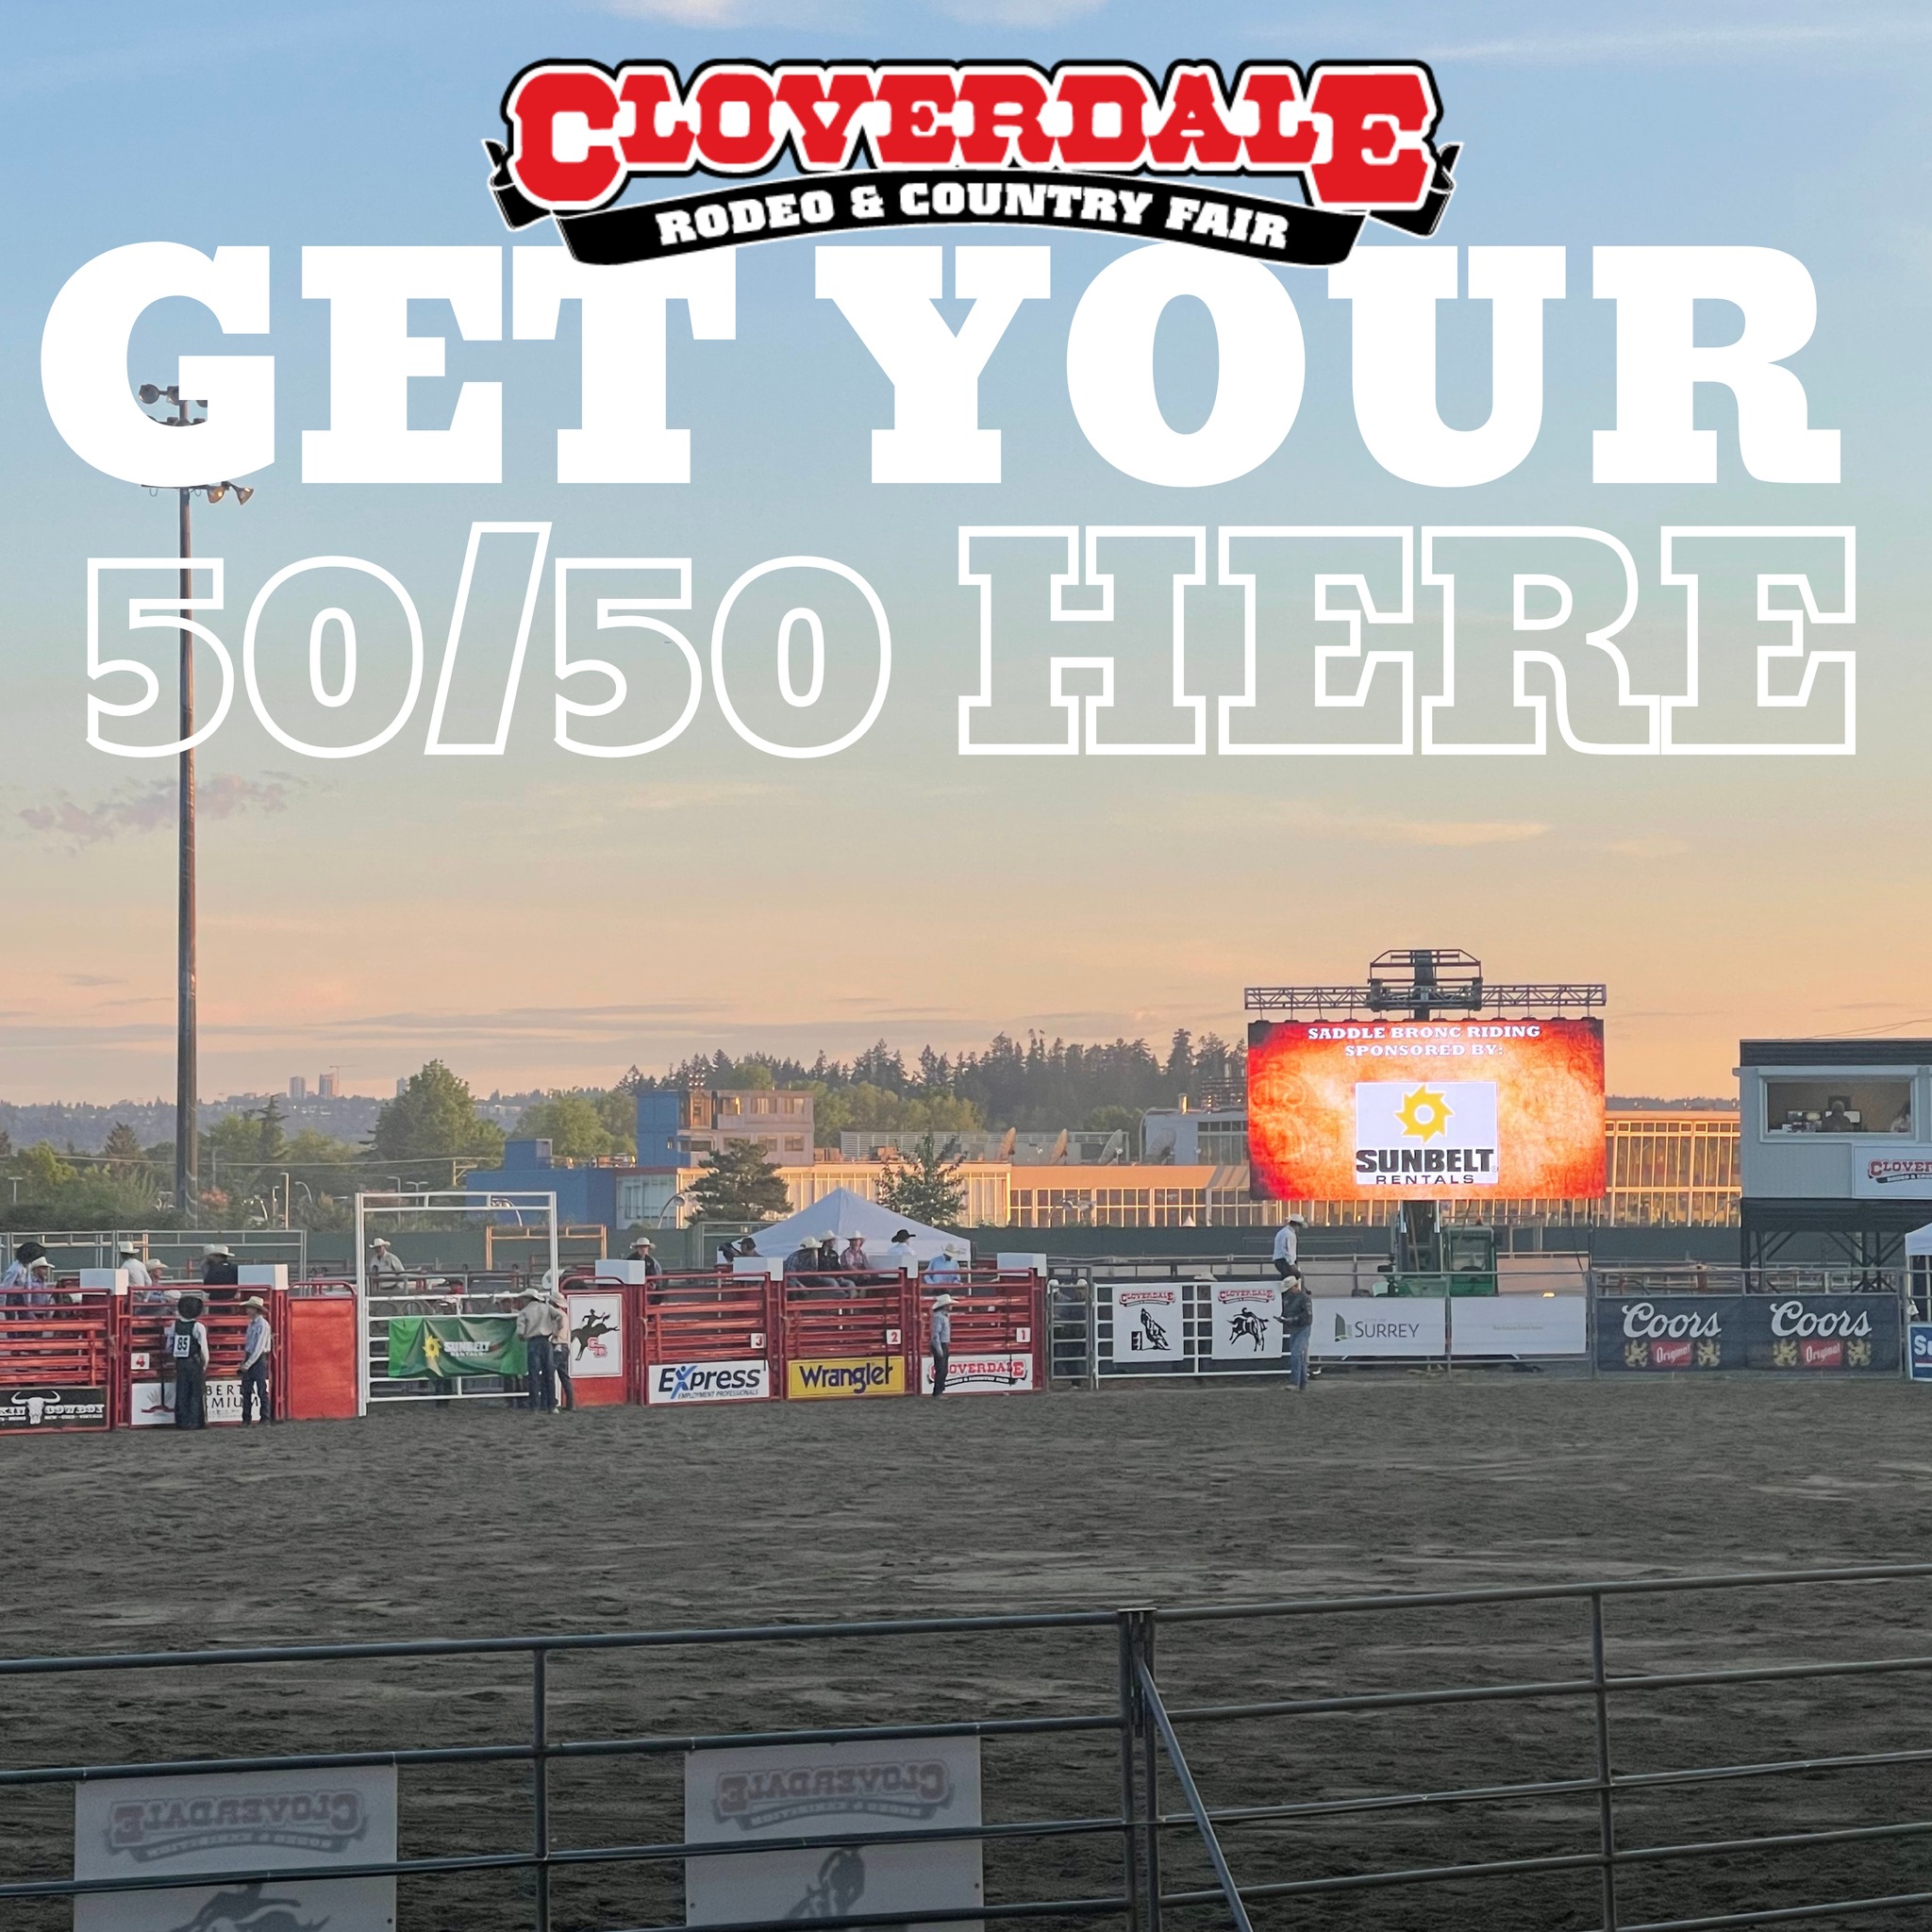 The Cloverdale Rodeo & Country Fair 50/50 Draw in support of the Cloverdale Rodeo Youth Foundation Initiative